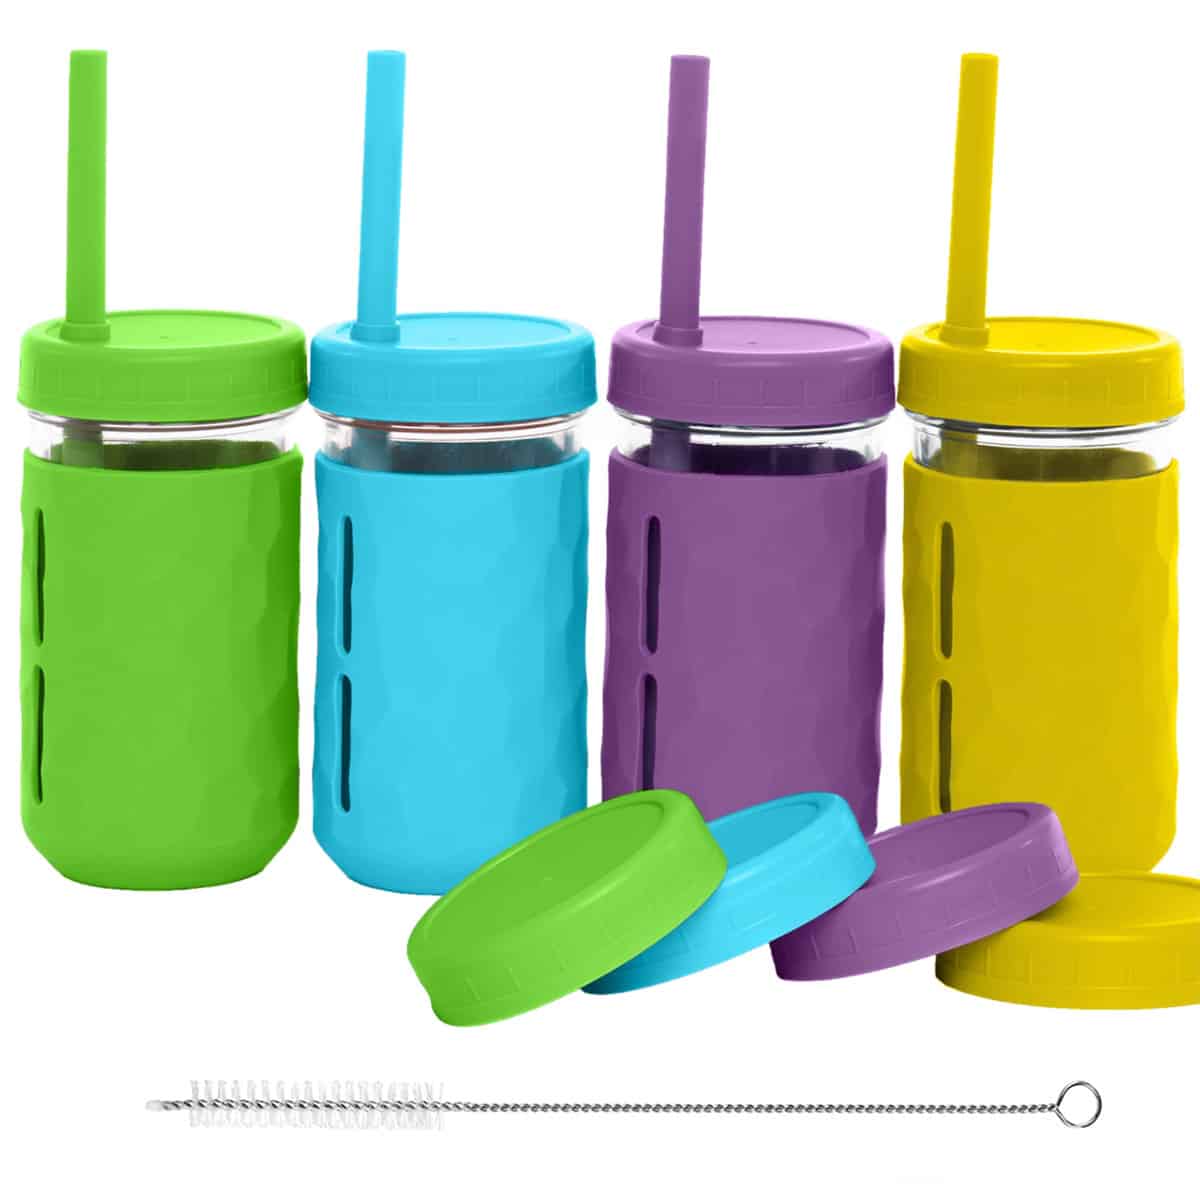 https://www.yummytoddlerfood.com/wp-content/uploads/2022/05/weesprout-glass-smoothie-straw-cups.jpg